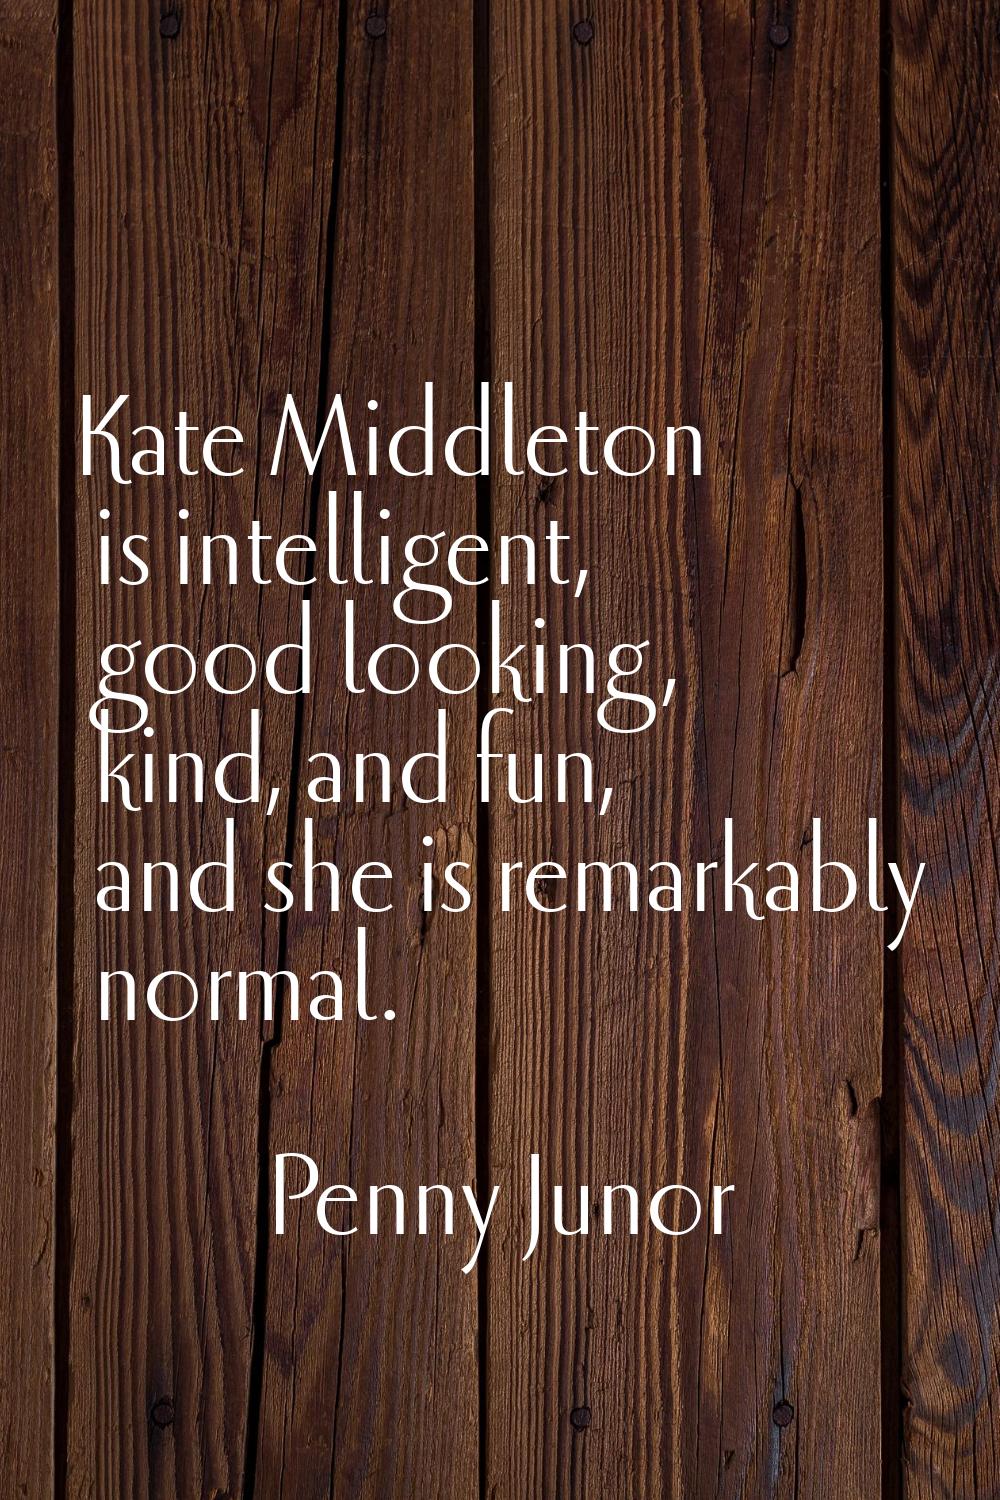 Kate Middleton is intelligent, good looking, kind, and fun, and she is remarkably normal.